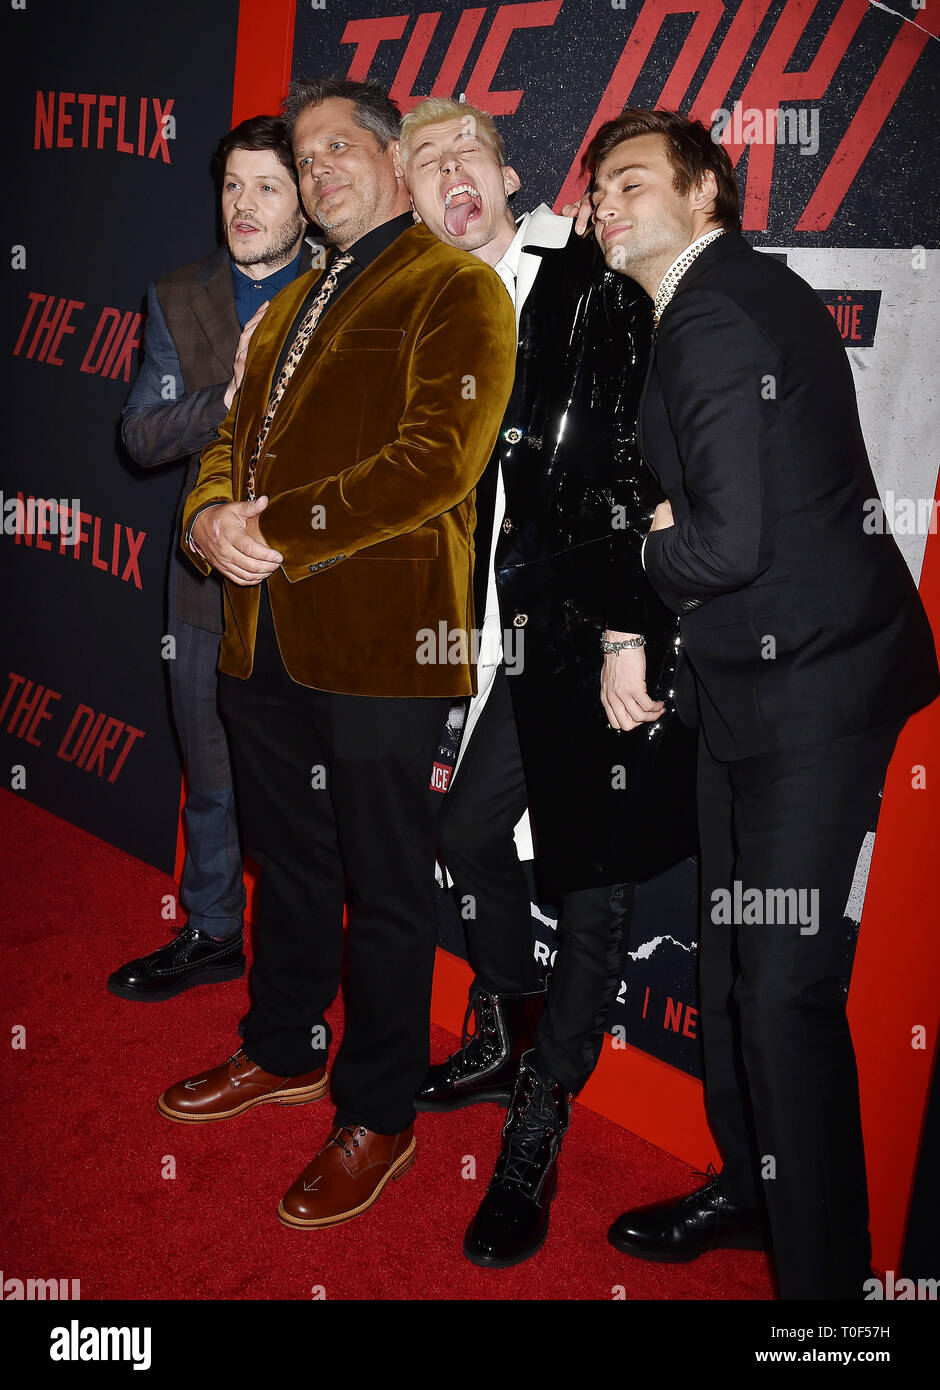 HOLLYWOOD, CA - MARCH 18: (L-R) Iwan Rheon, Jeff Tremaine, Colson Baker and Douglas Booth arrive at the Premiere Of Netflix's 'The Dirt' at ArcLight Hollywood on March 18, 2019 in Hollywood, California. Stock Photo